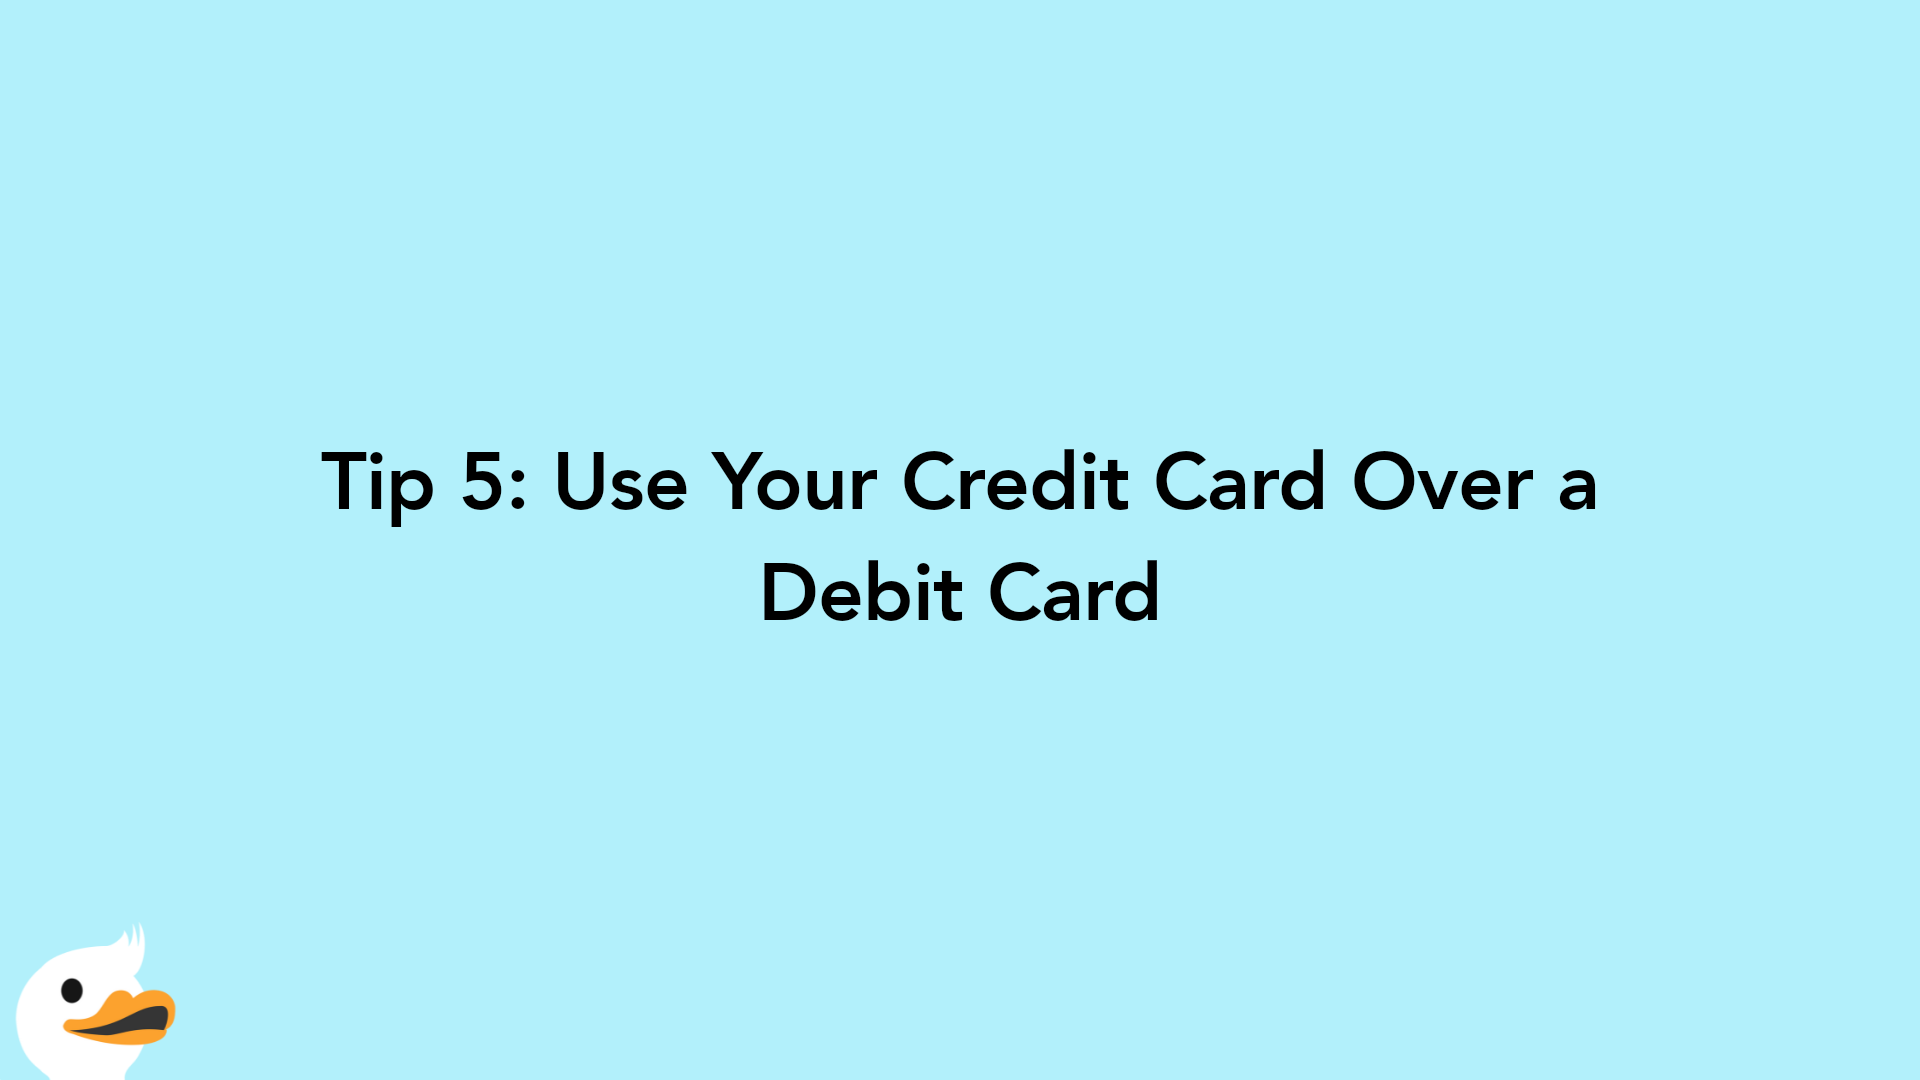 Tip 5: Use Your Credit Card Over a Debit Card